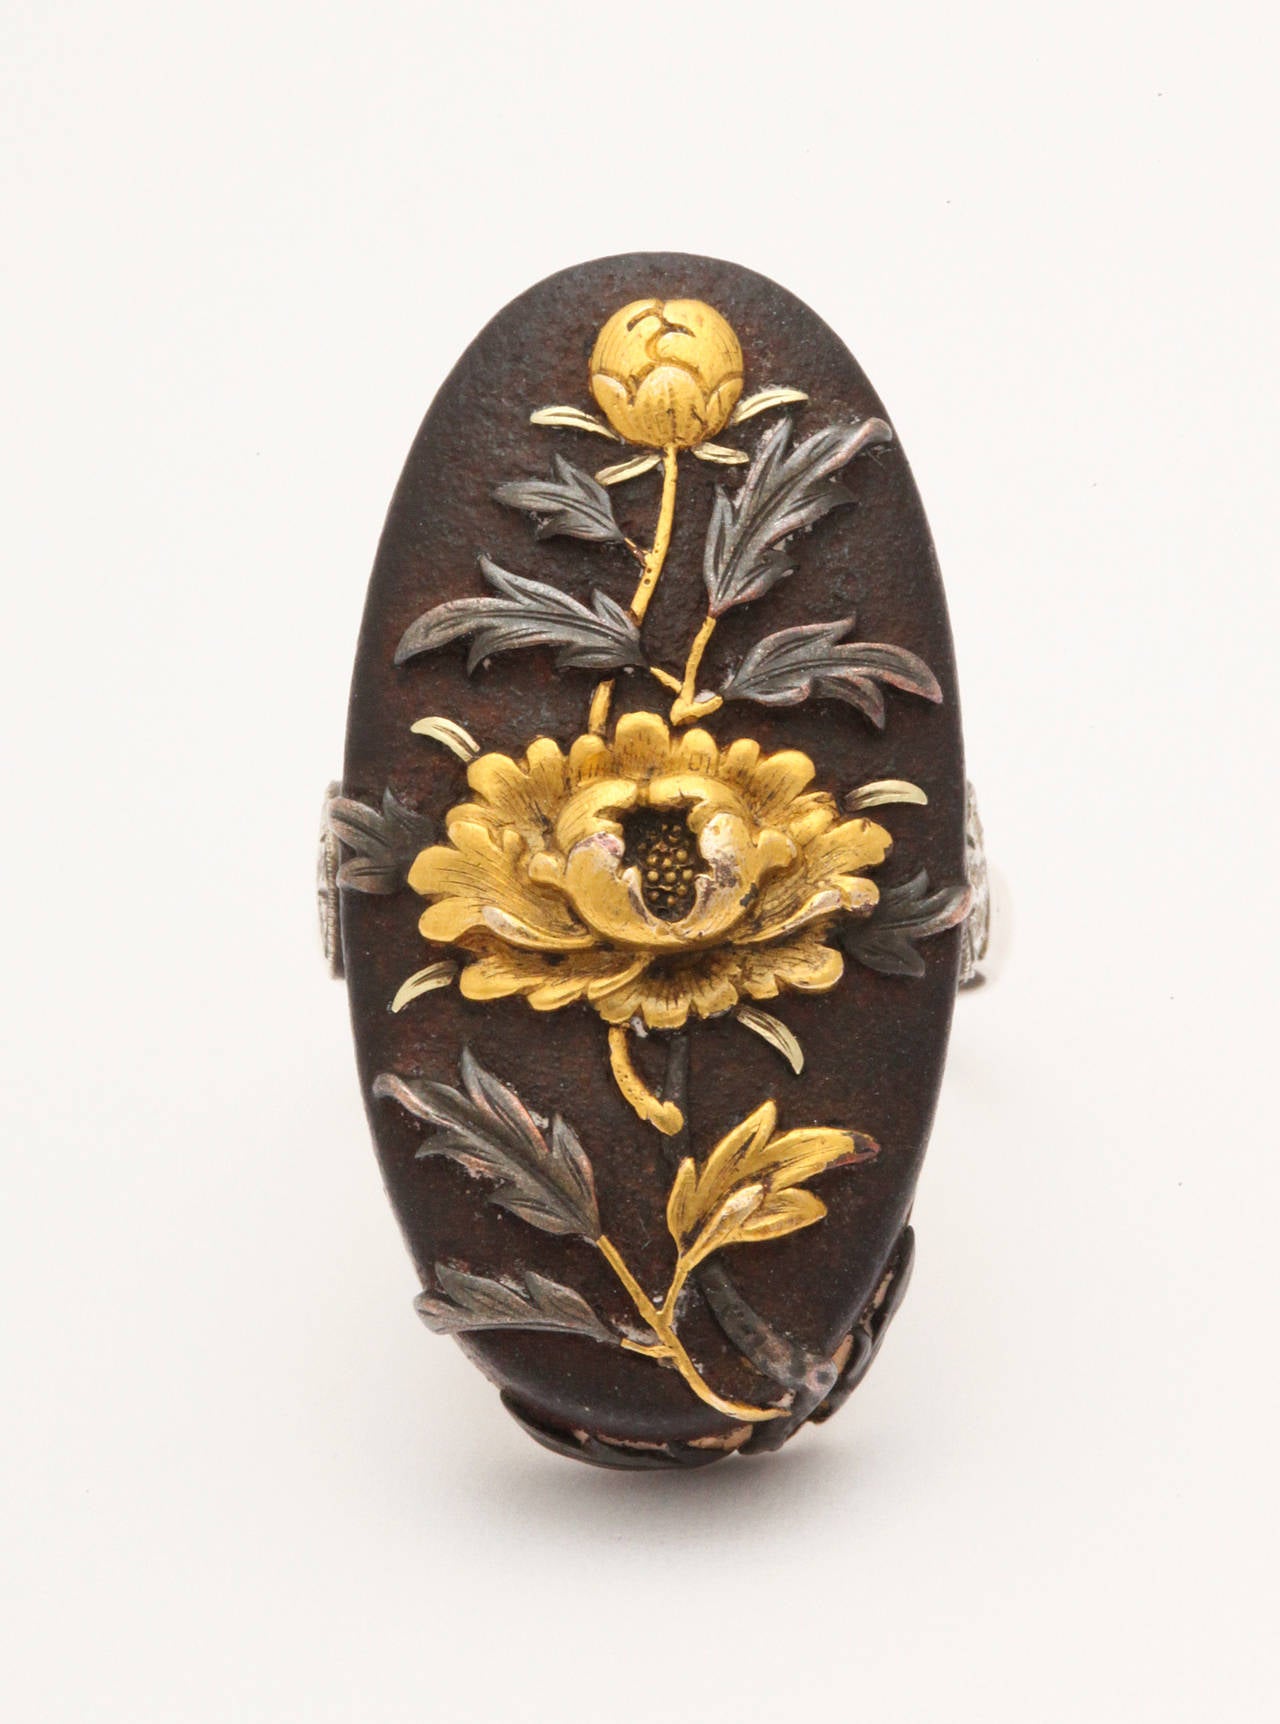 A stunner of a ring in the historic Japanese art form known as Shakudo originated in the Samurai period in Japan by esteemed artists who made ornaments to adorn swords and armor. When the Samurai period ended, these artists moved to making wearable